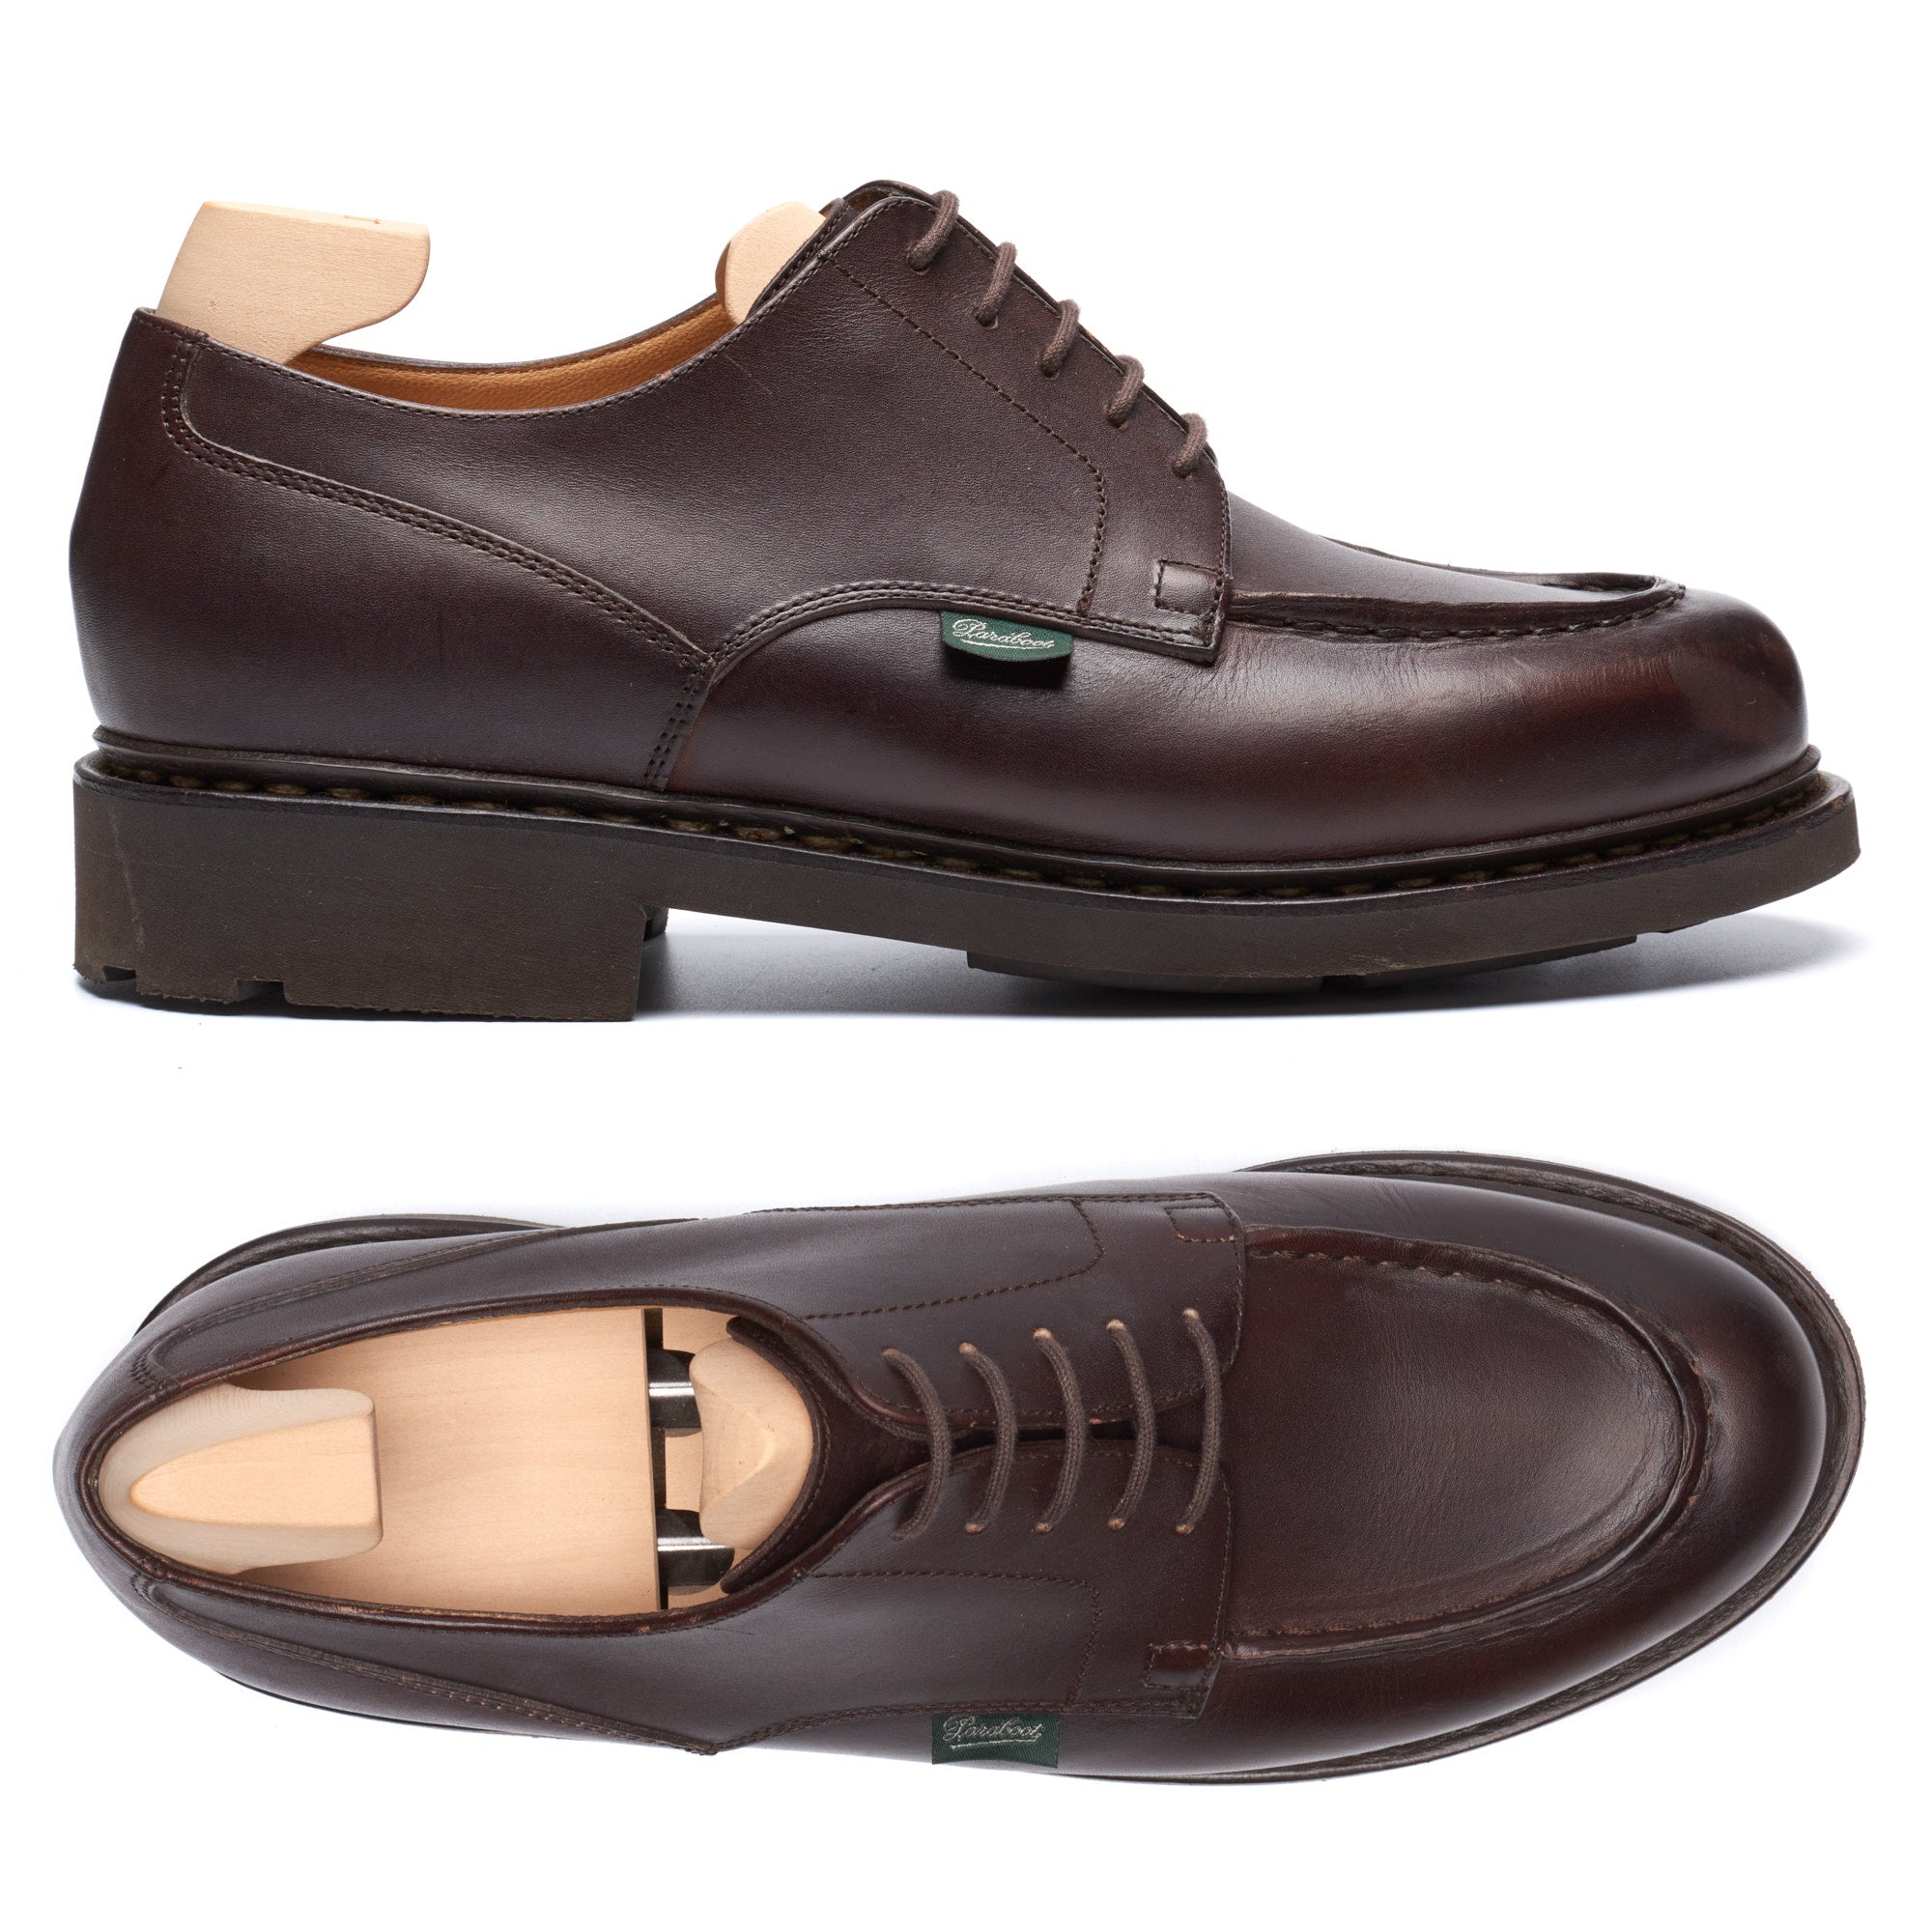 PARABOOT Chambord Brown Plained Leather Norwegian Derby Shoes UK